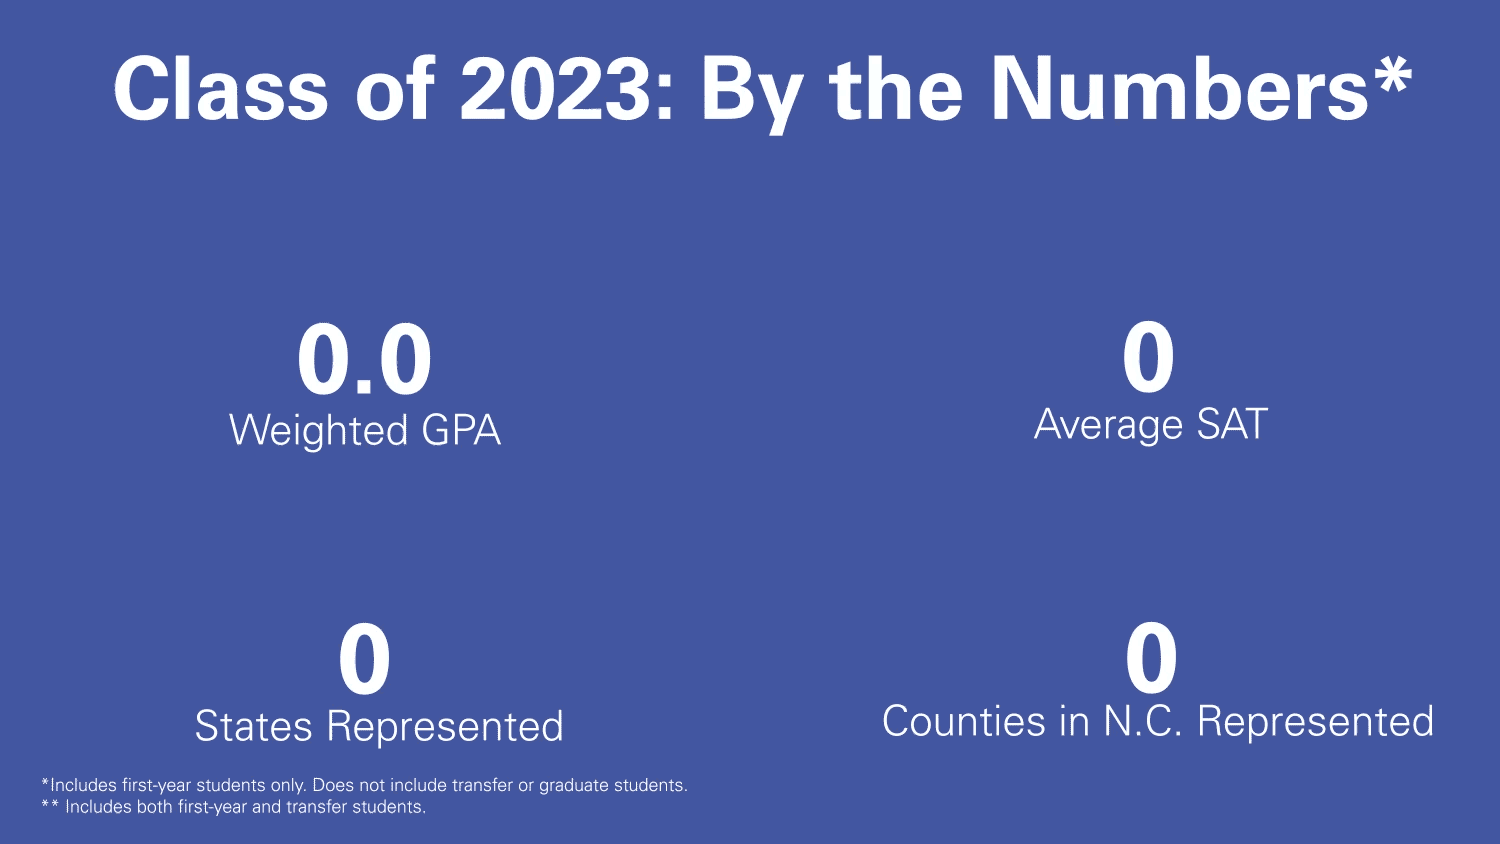 Class of 2023: By the Numbers.